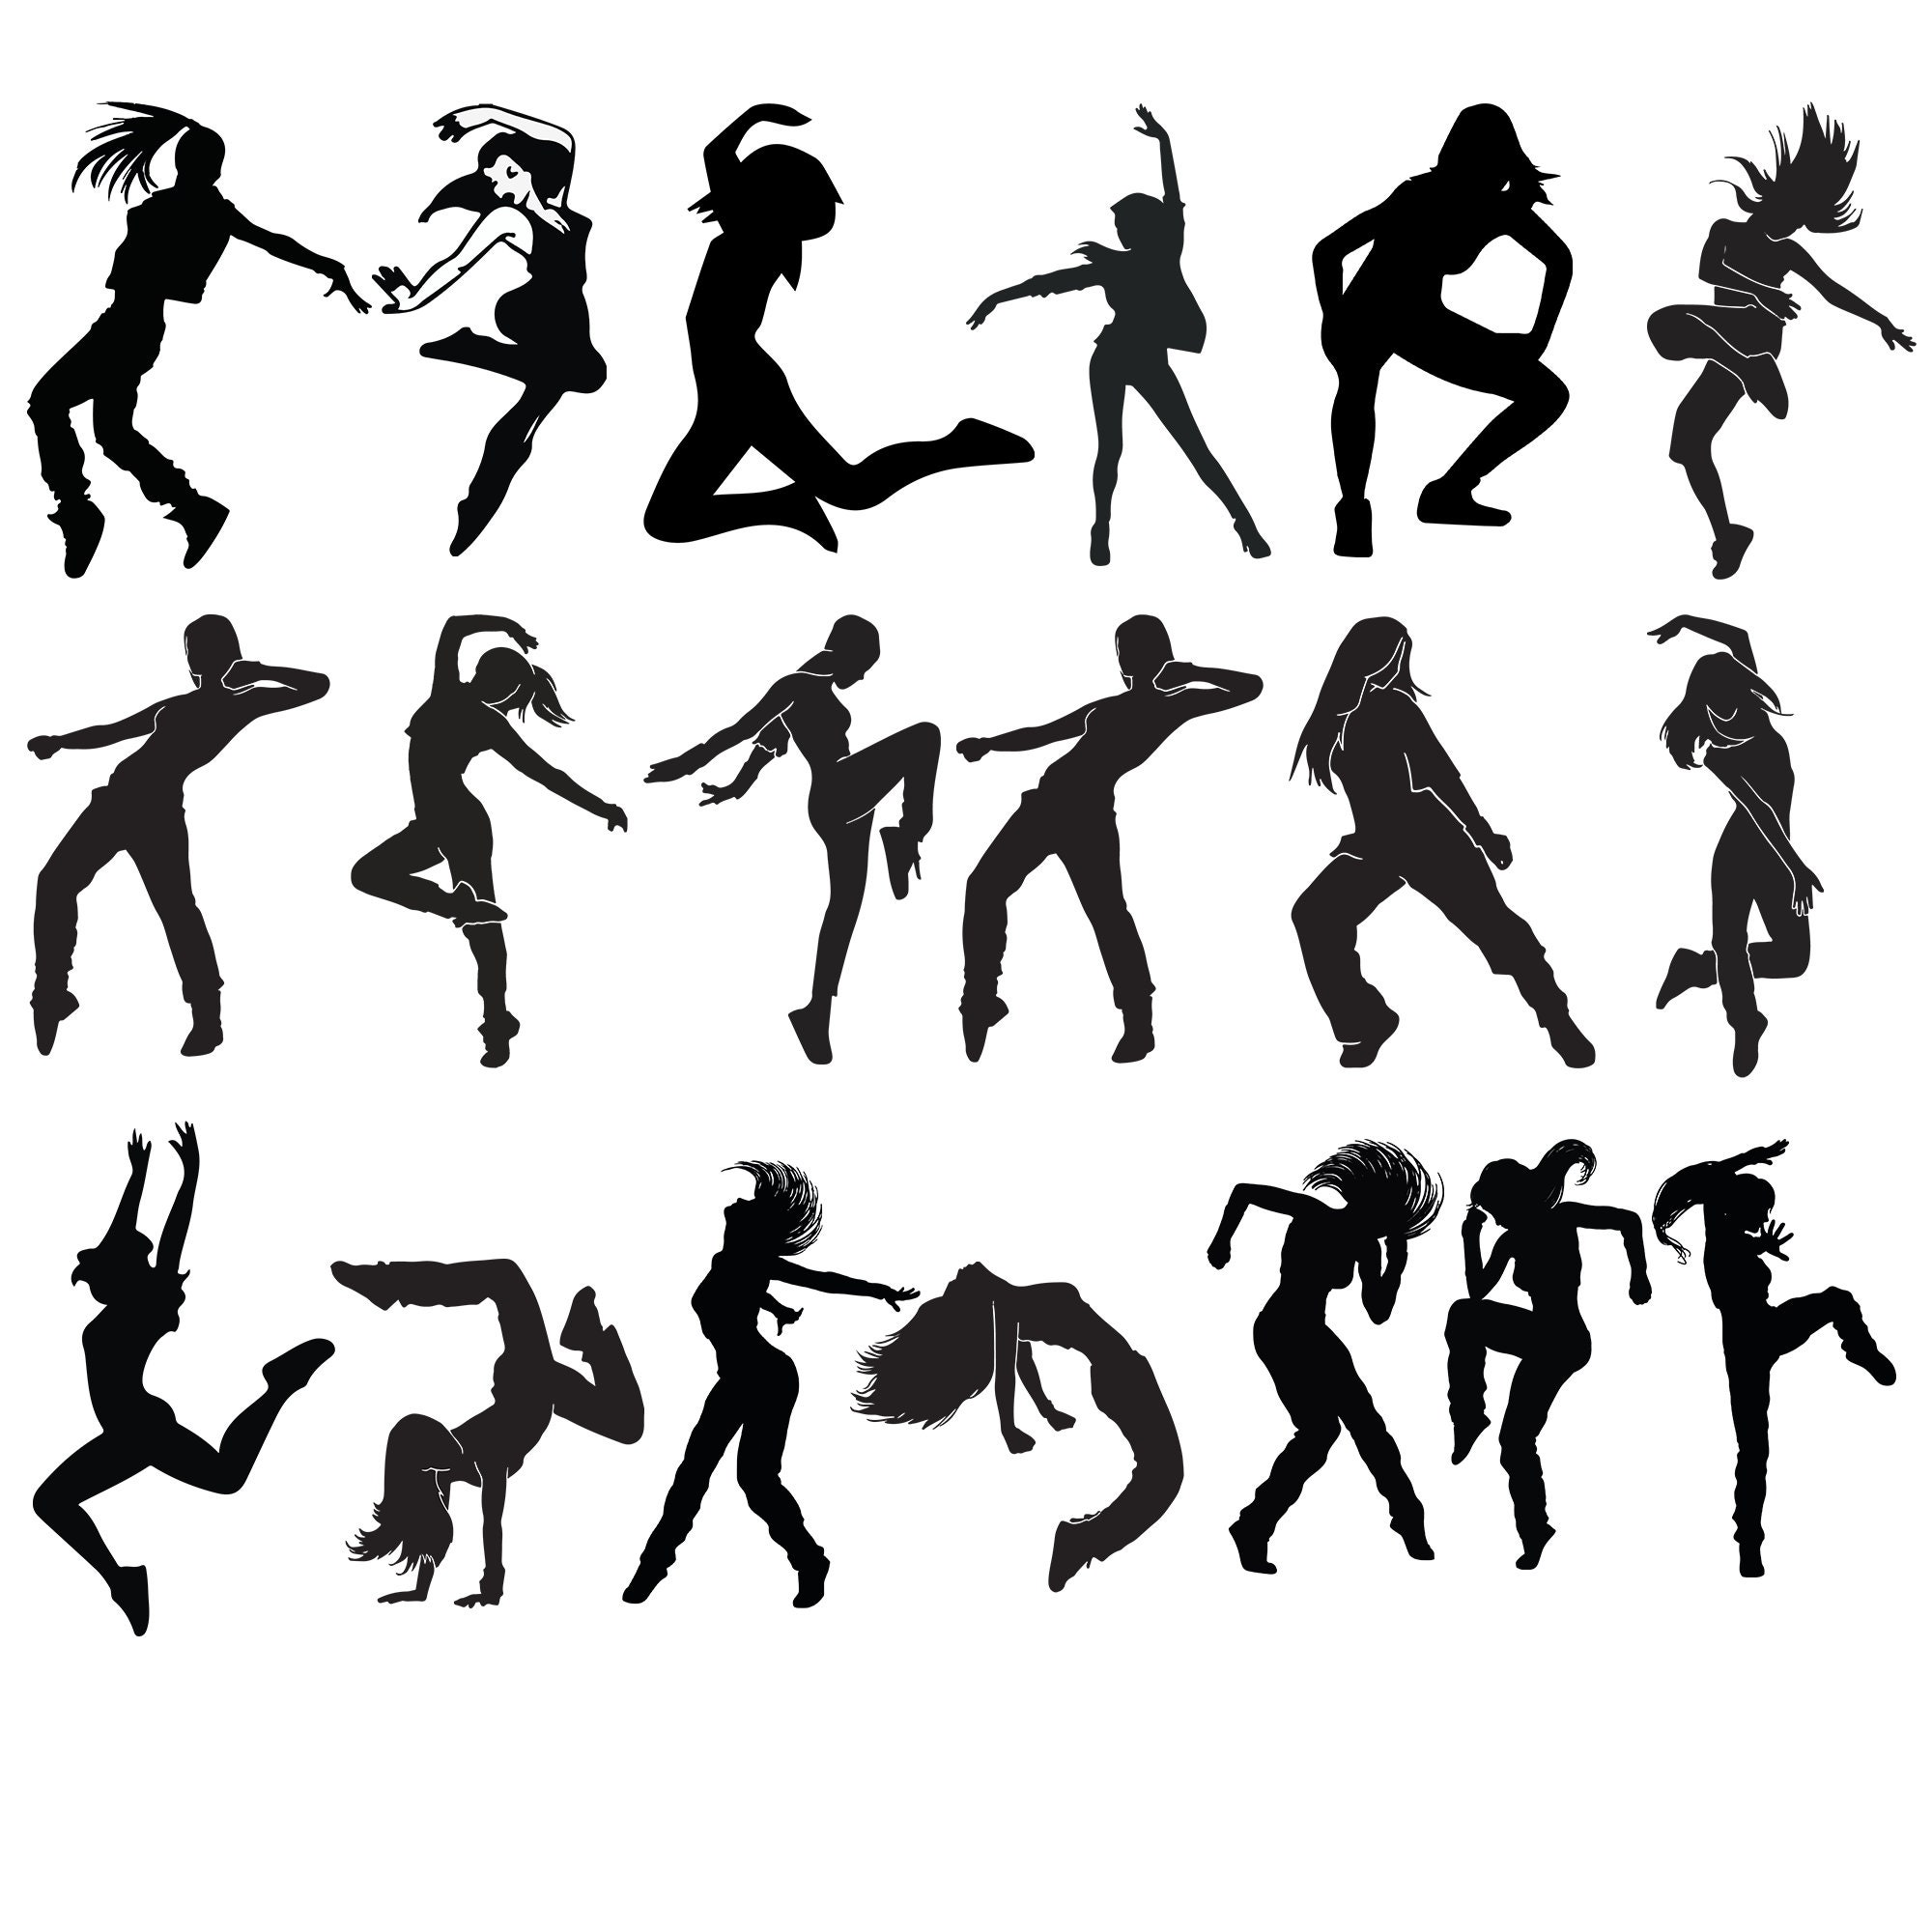 Jumping People Silhouette PNG Images | PSD Free Download - Pikbest